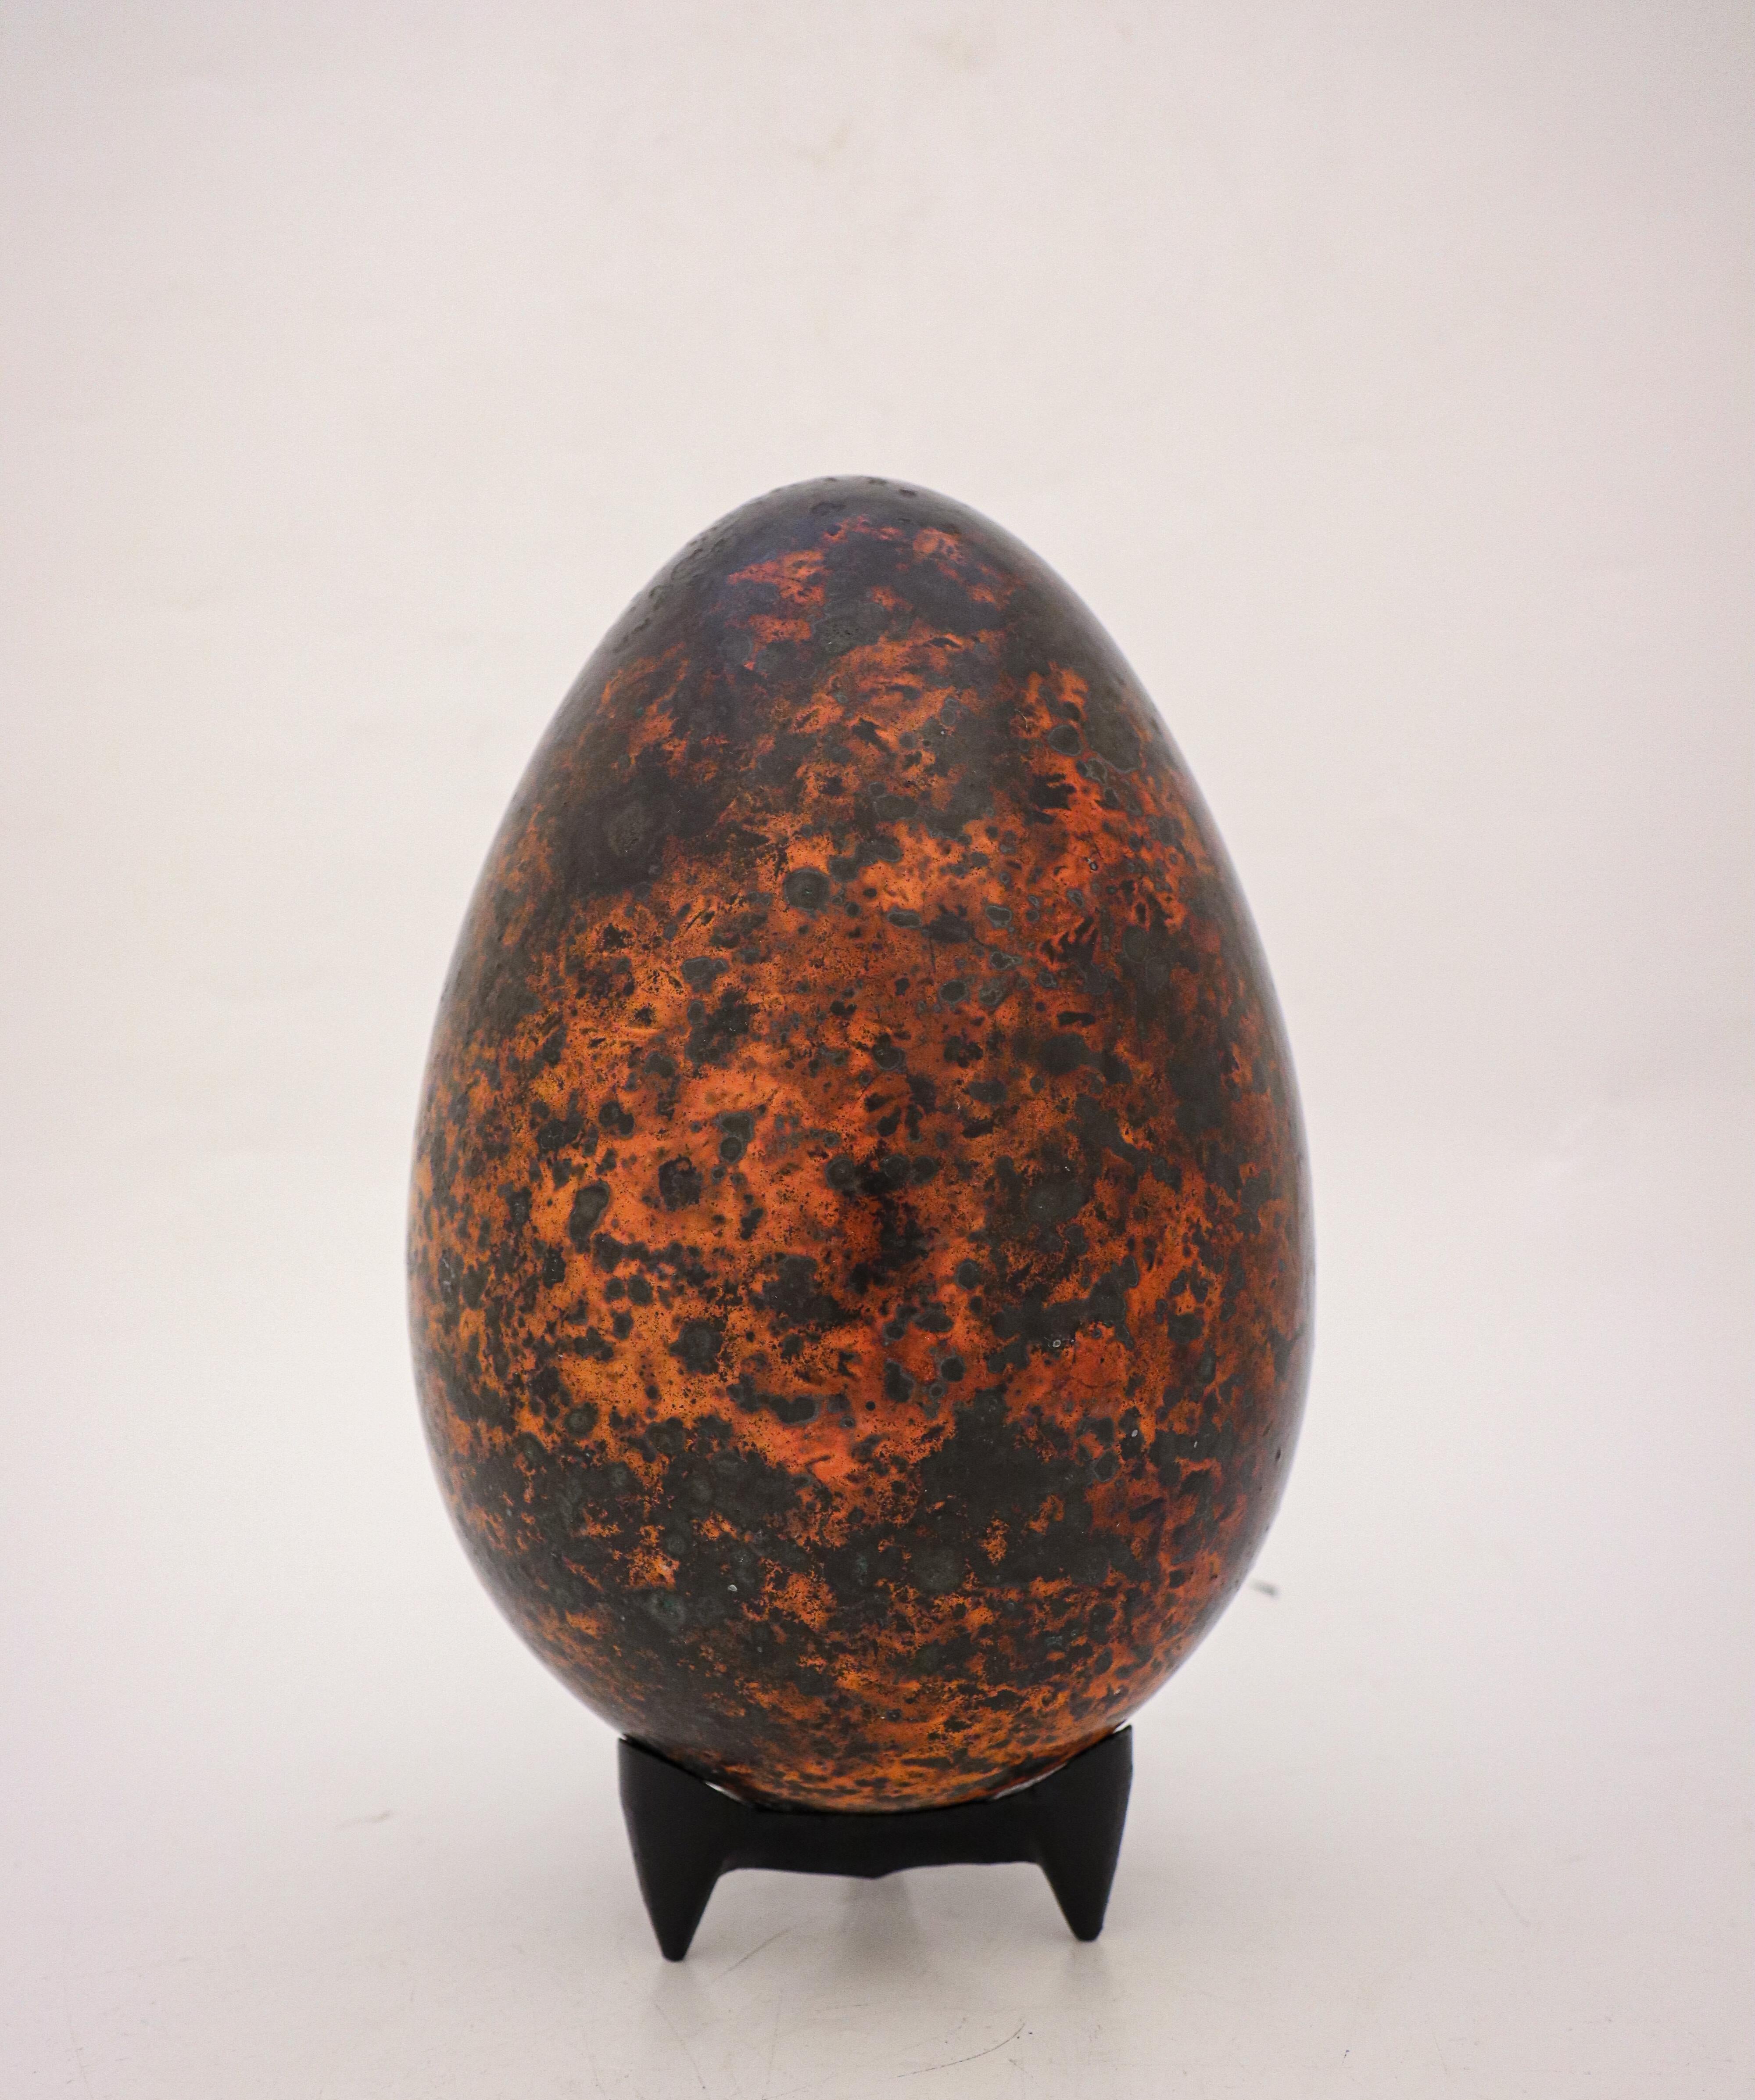 Egg designed by the Swedish ceramicist Hans Hedberg, who lived and worked in Biot, France. This egg is 30 cm (12